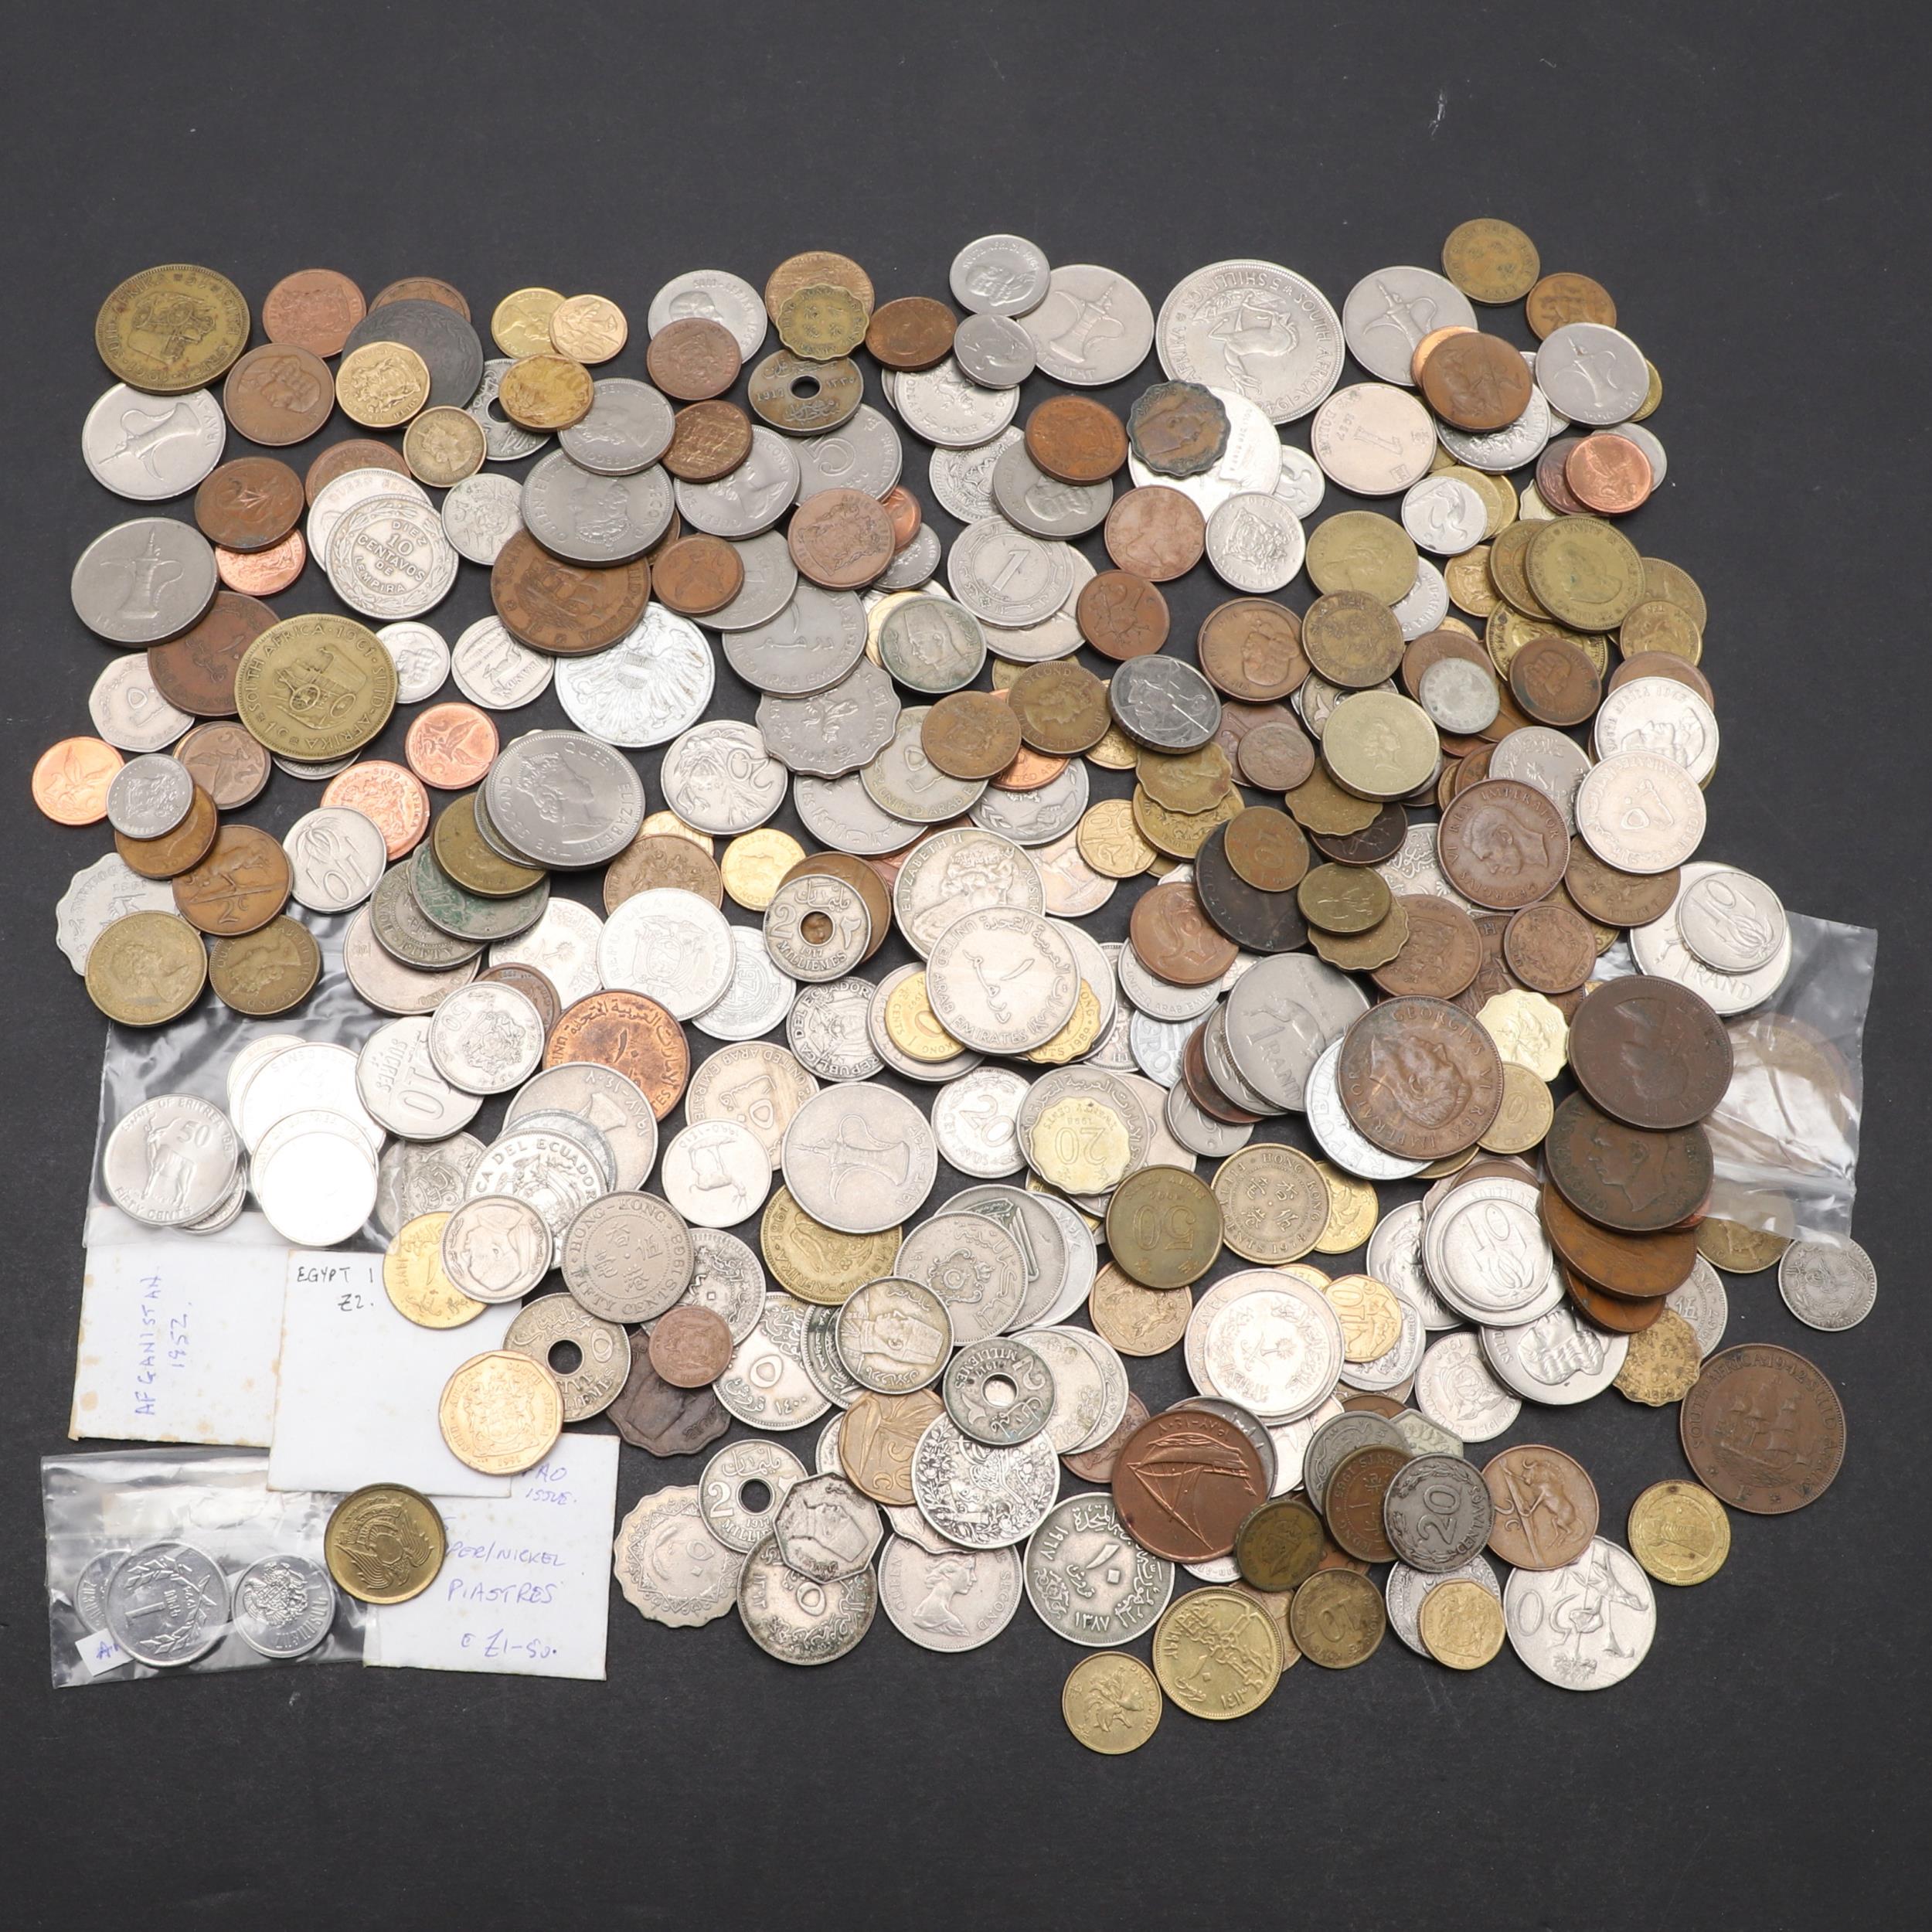 A MIXED COLLECTION OF WORLD COINS TO INCLUDE COINS FROM AFGHANISTAN, EGYPT AND OTHER COUNTRIES.